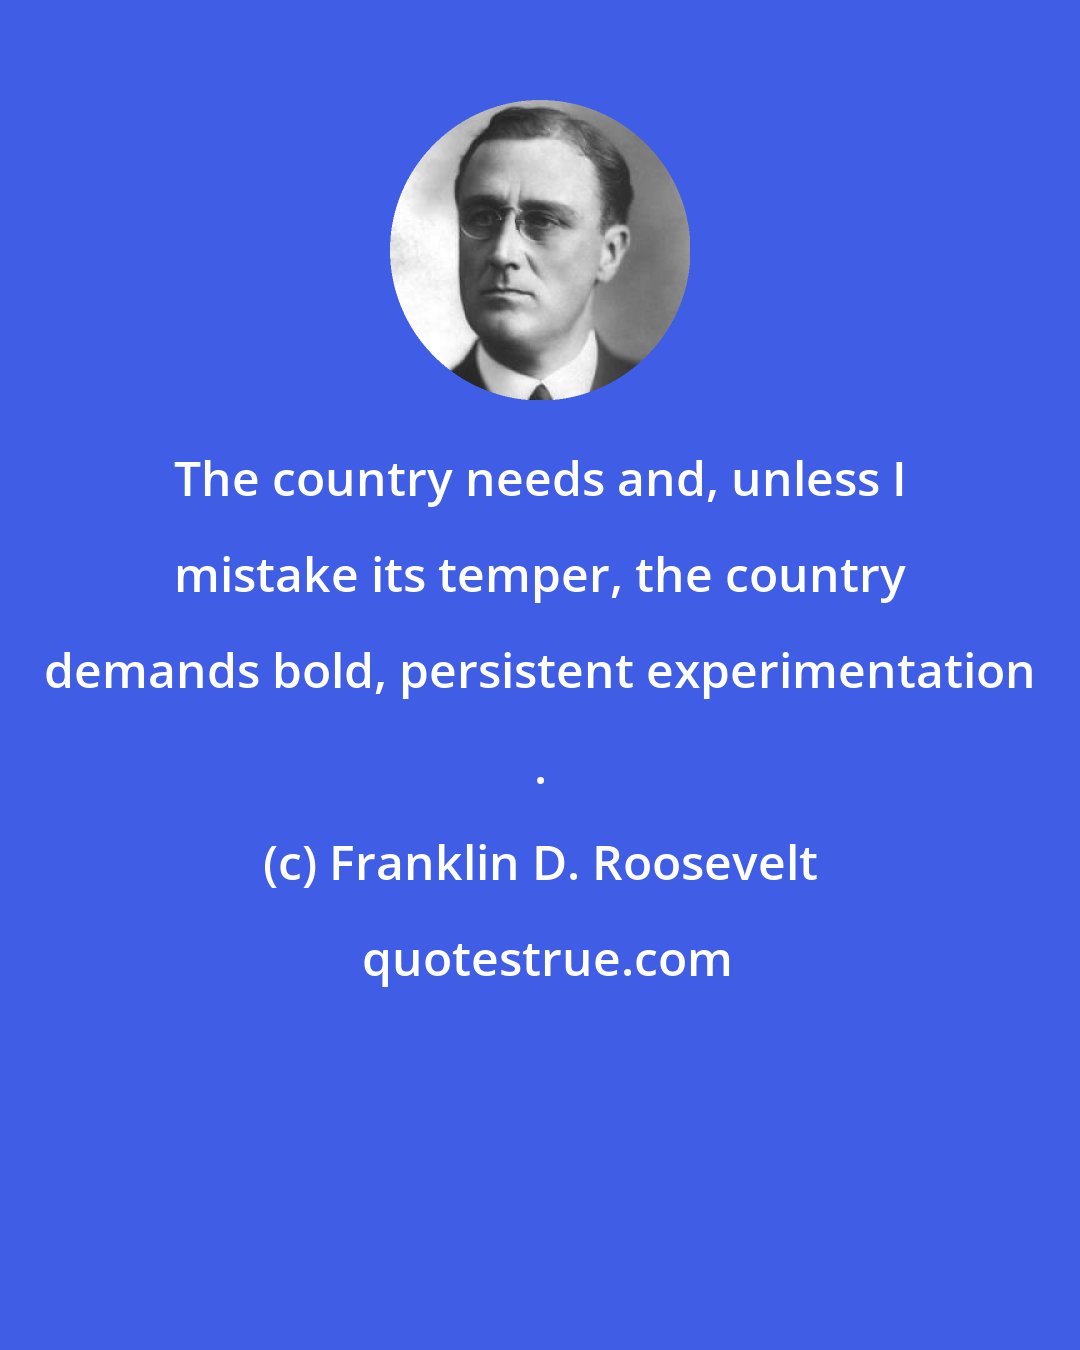 Franklin D. Roosevelt: The country needs and, unless I mistake its temper, the country demands bold, persistent experimentation .